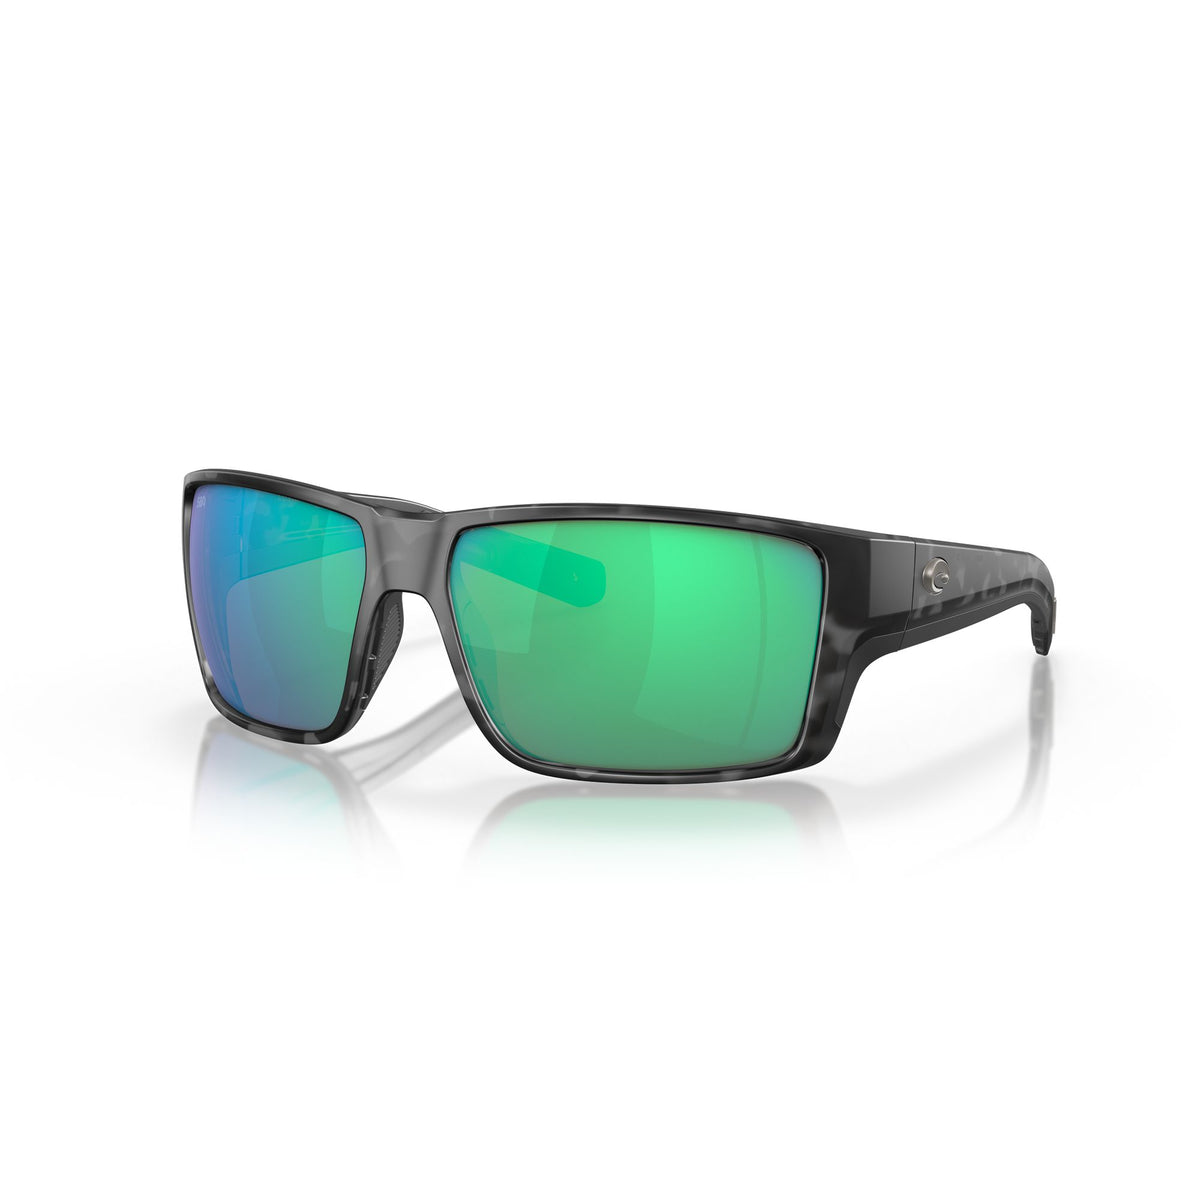 View of Sunglasses Costa Reefton Pro Tiger Shark Green Mirror 580G available at EZOKO Pike and Musky Shop